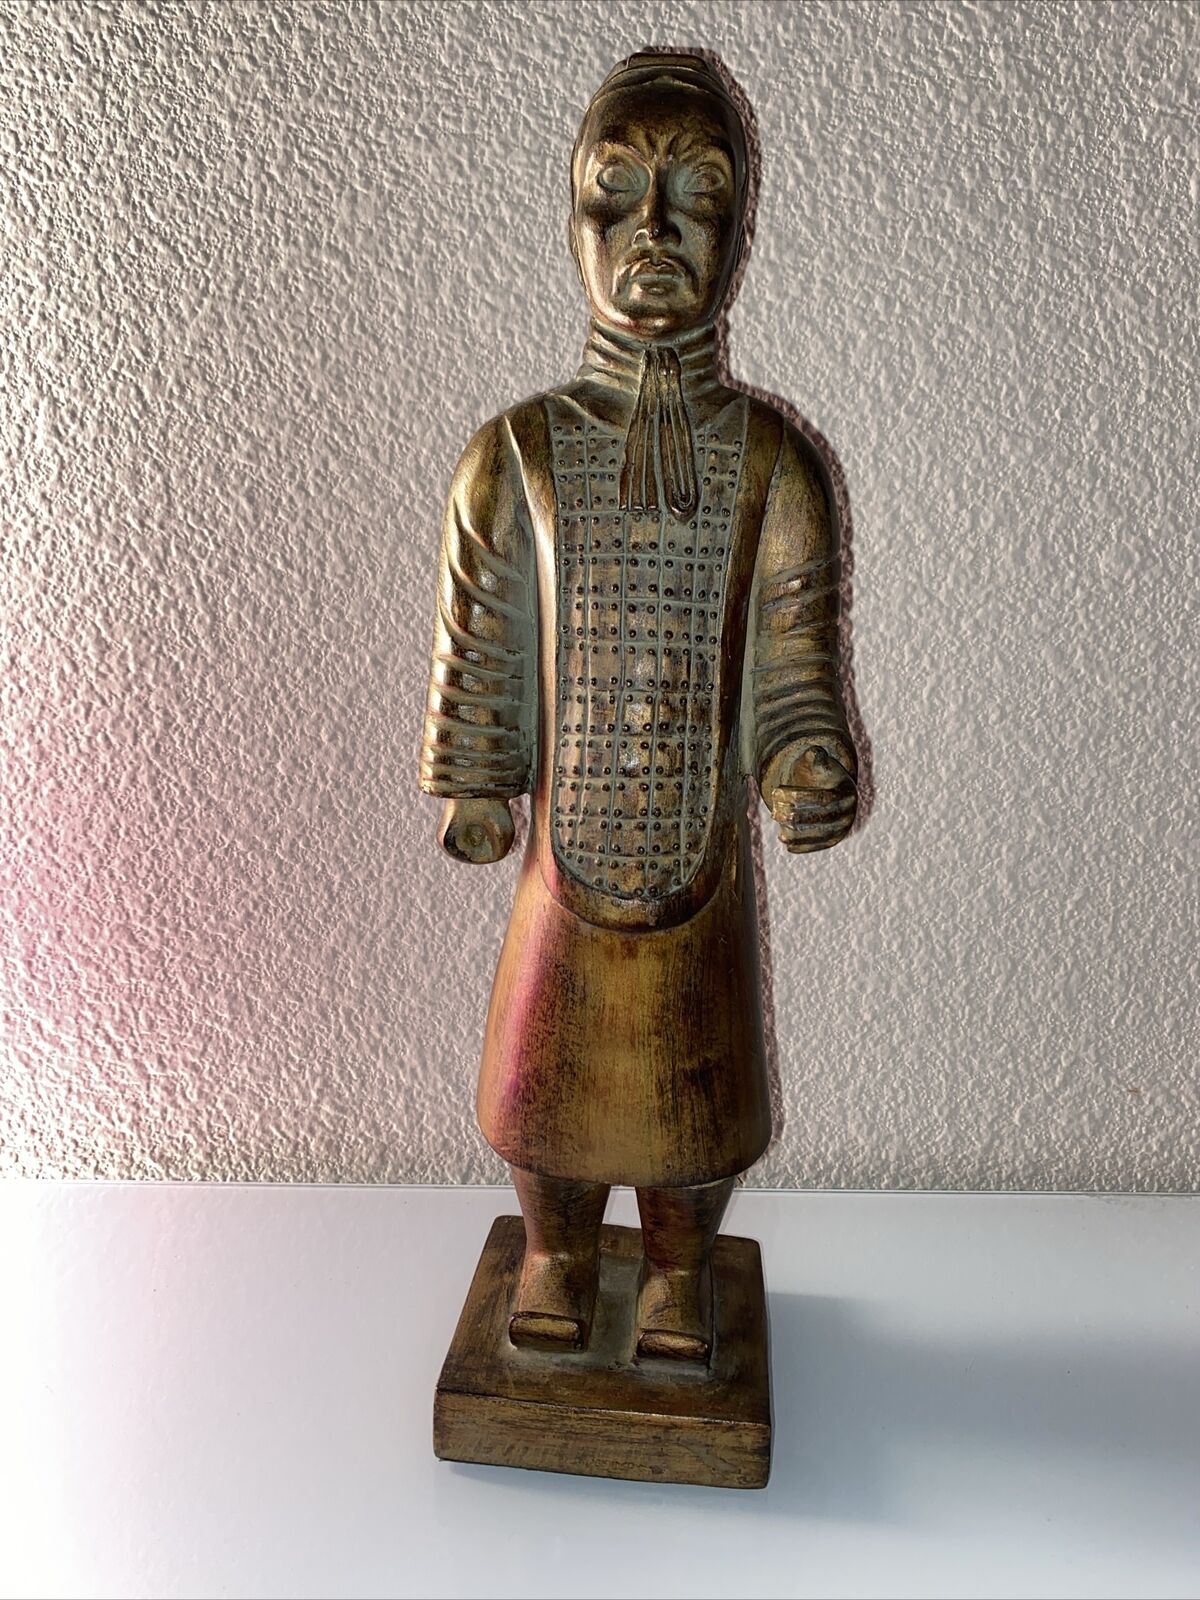 Vintage Chinese Emperor of Qin Mausoleum-Style Terracotta Warrior Statue